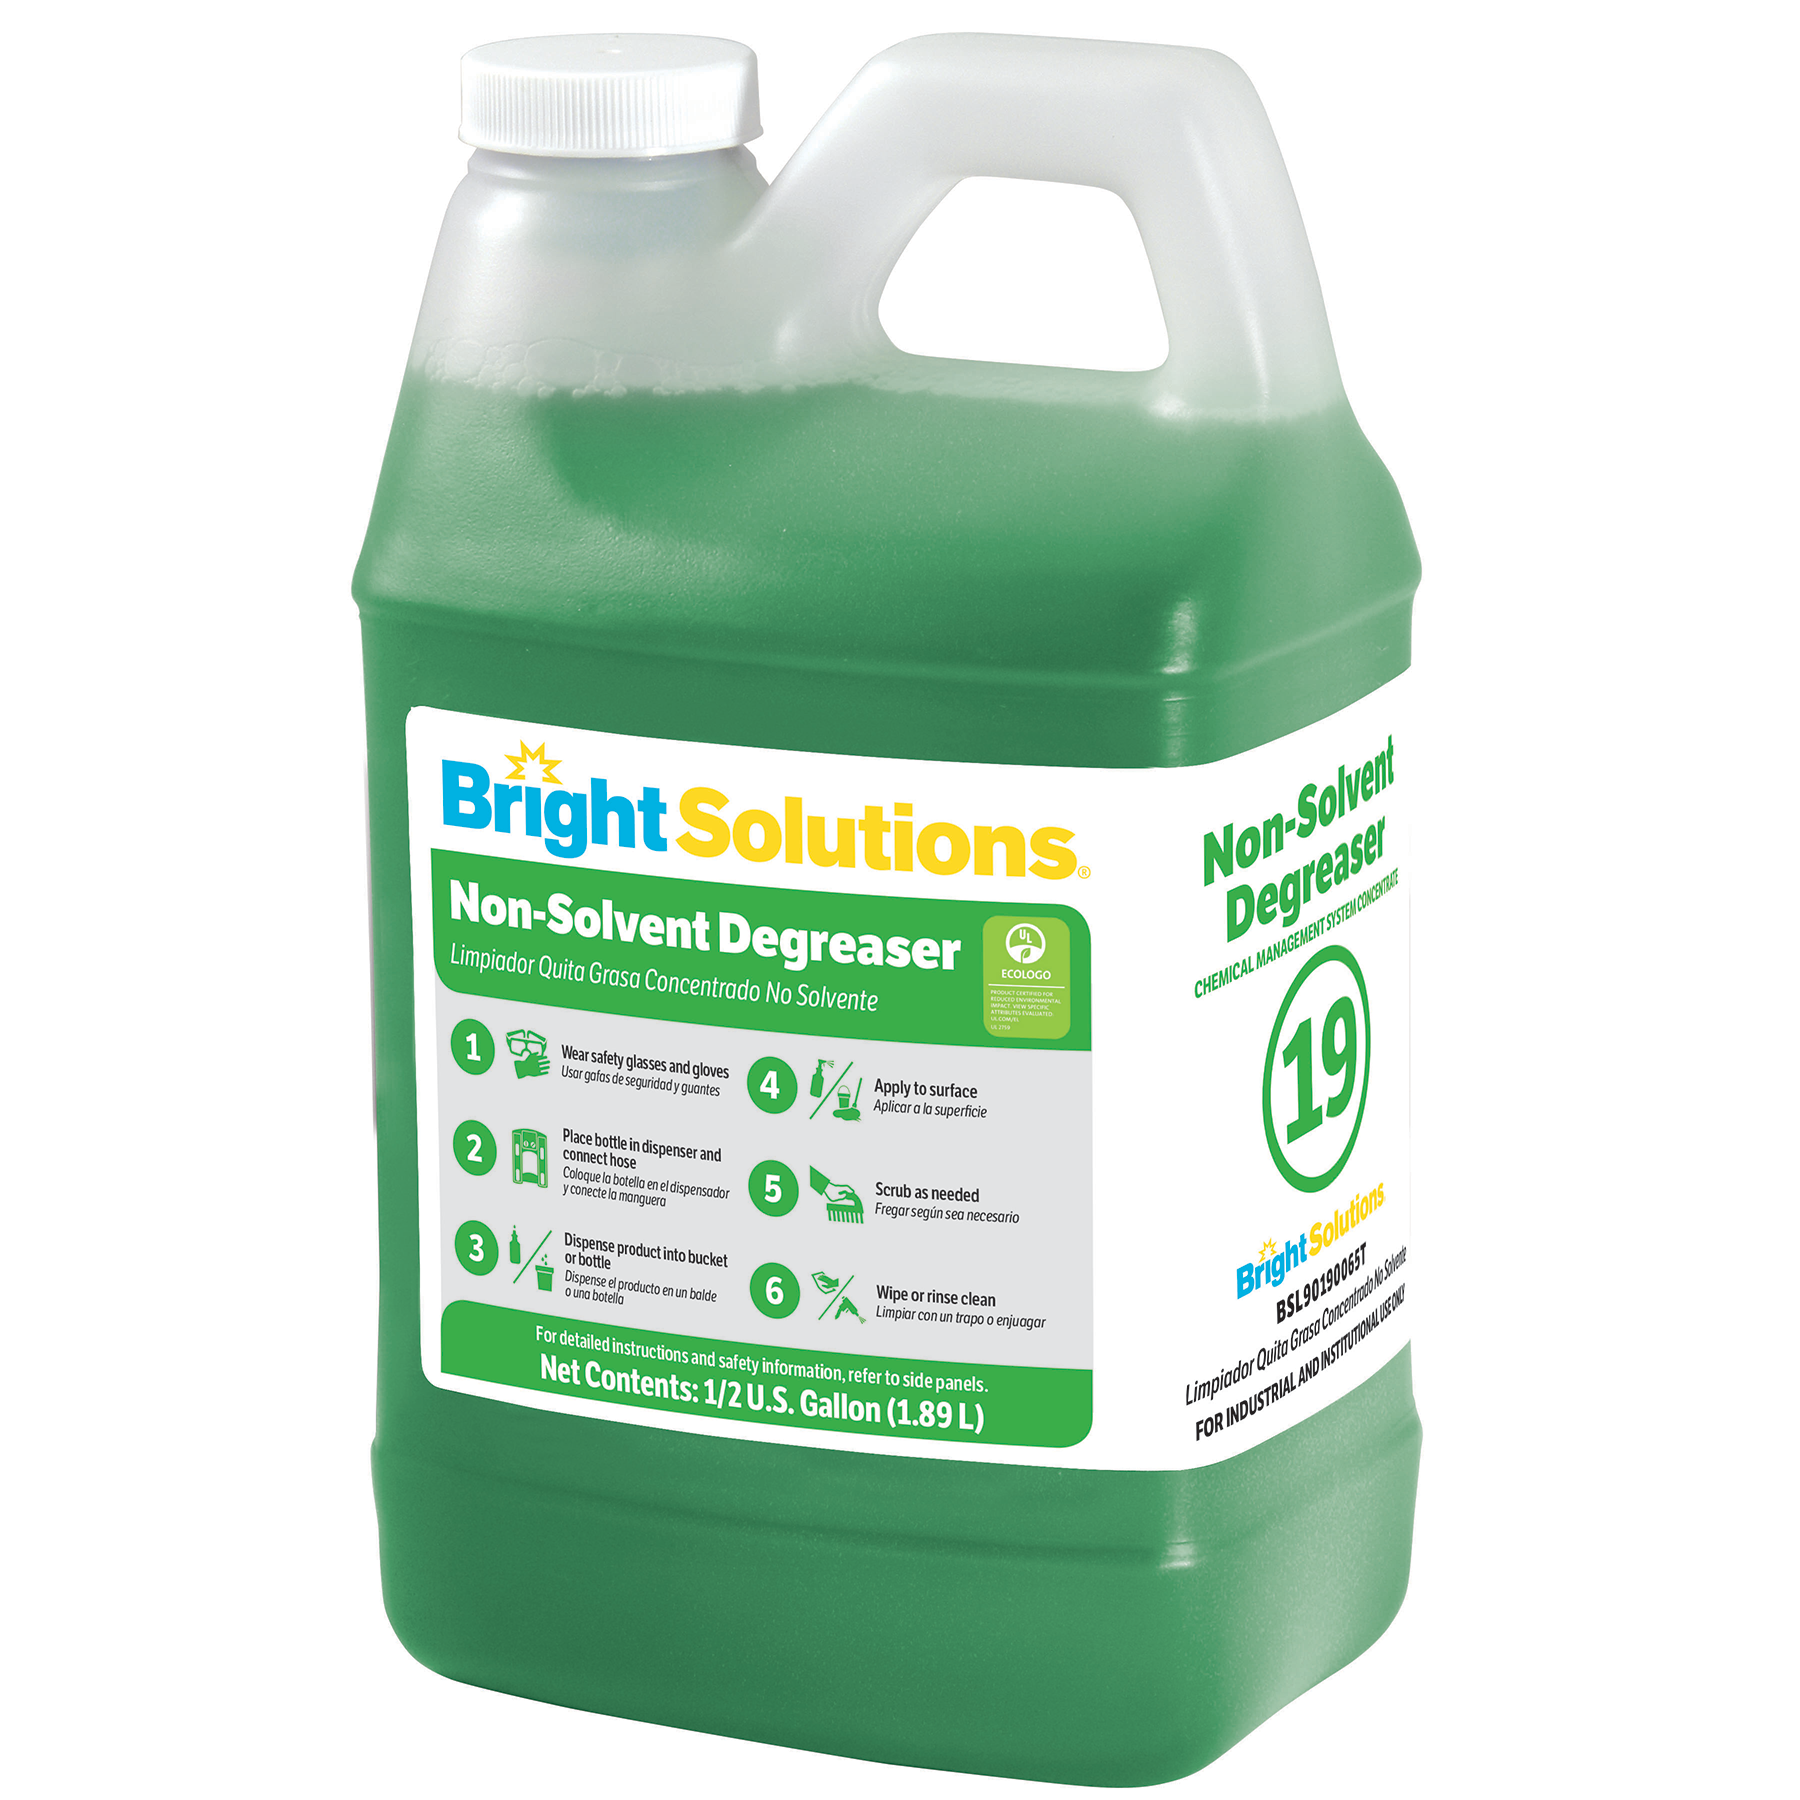 Bright Solutions® Non-Solvent Degreaser #19, 4/64oz